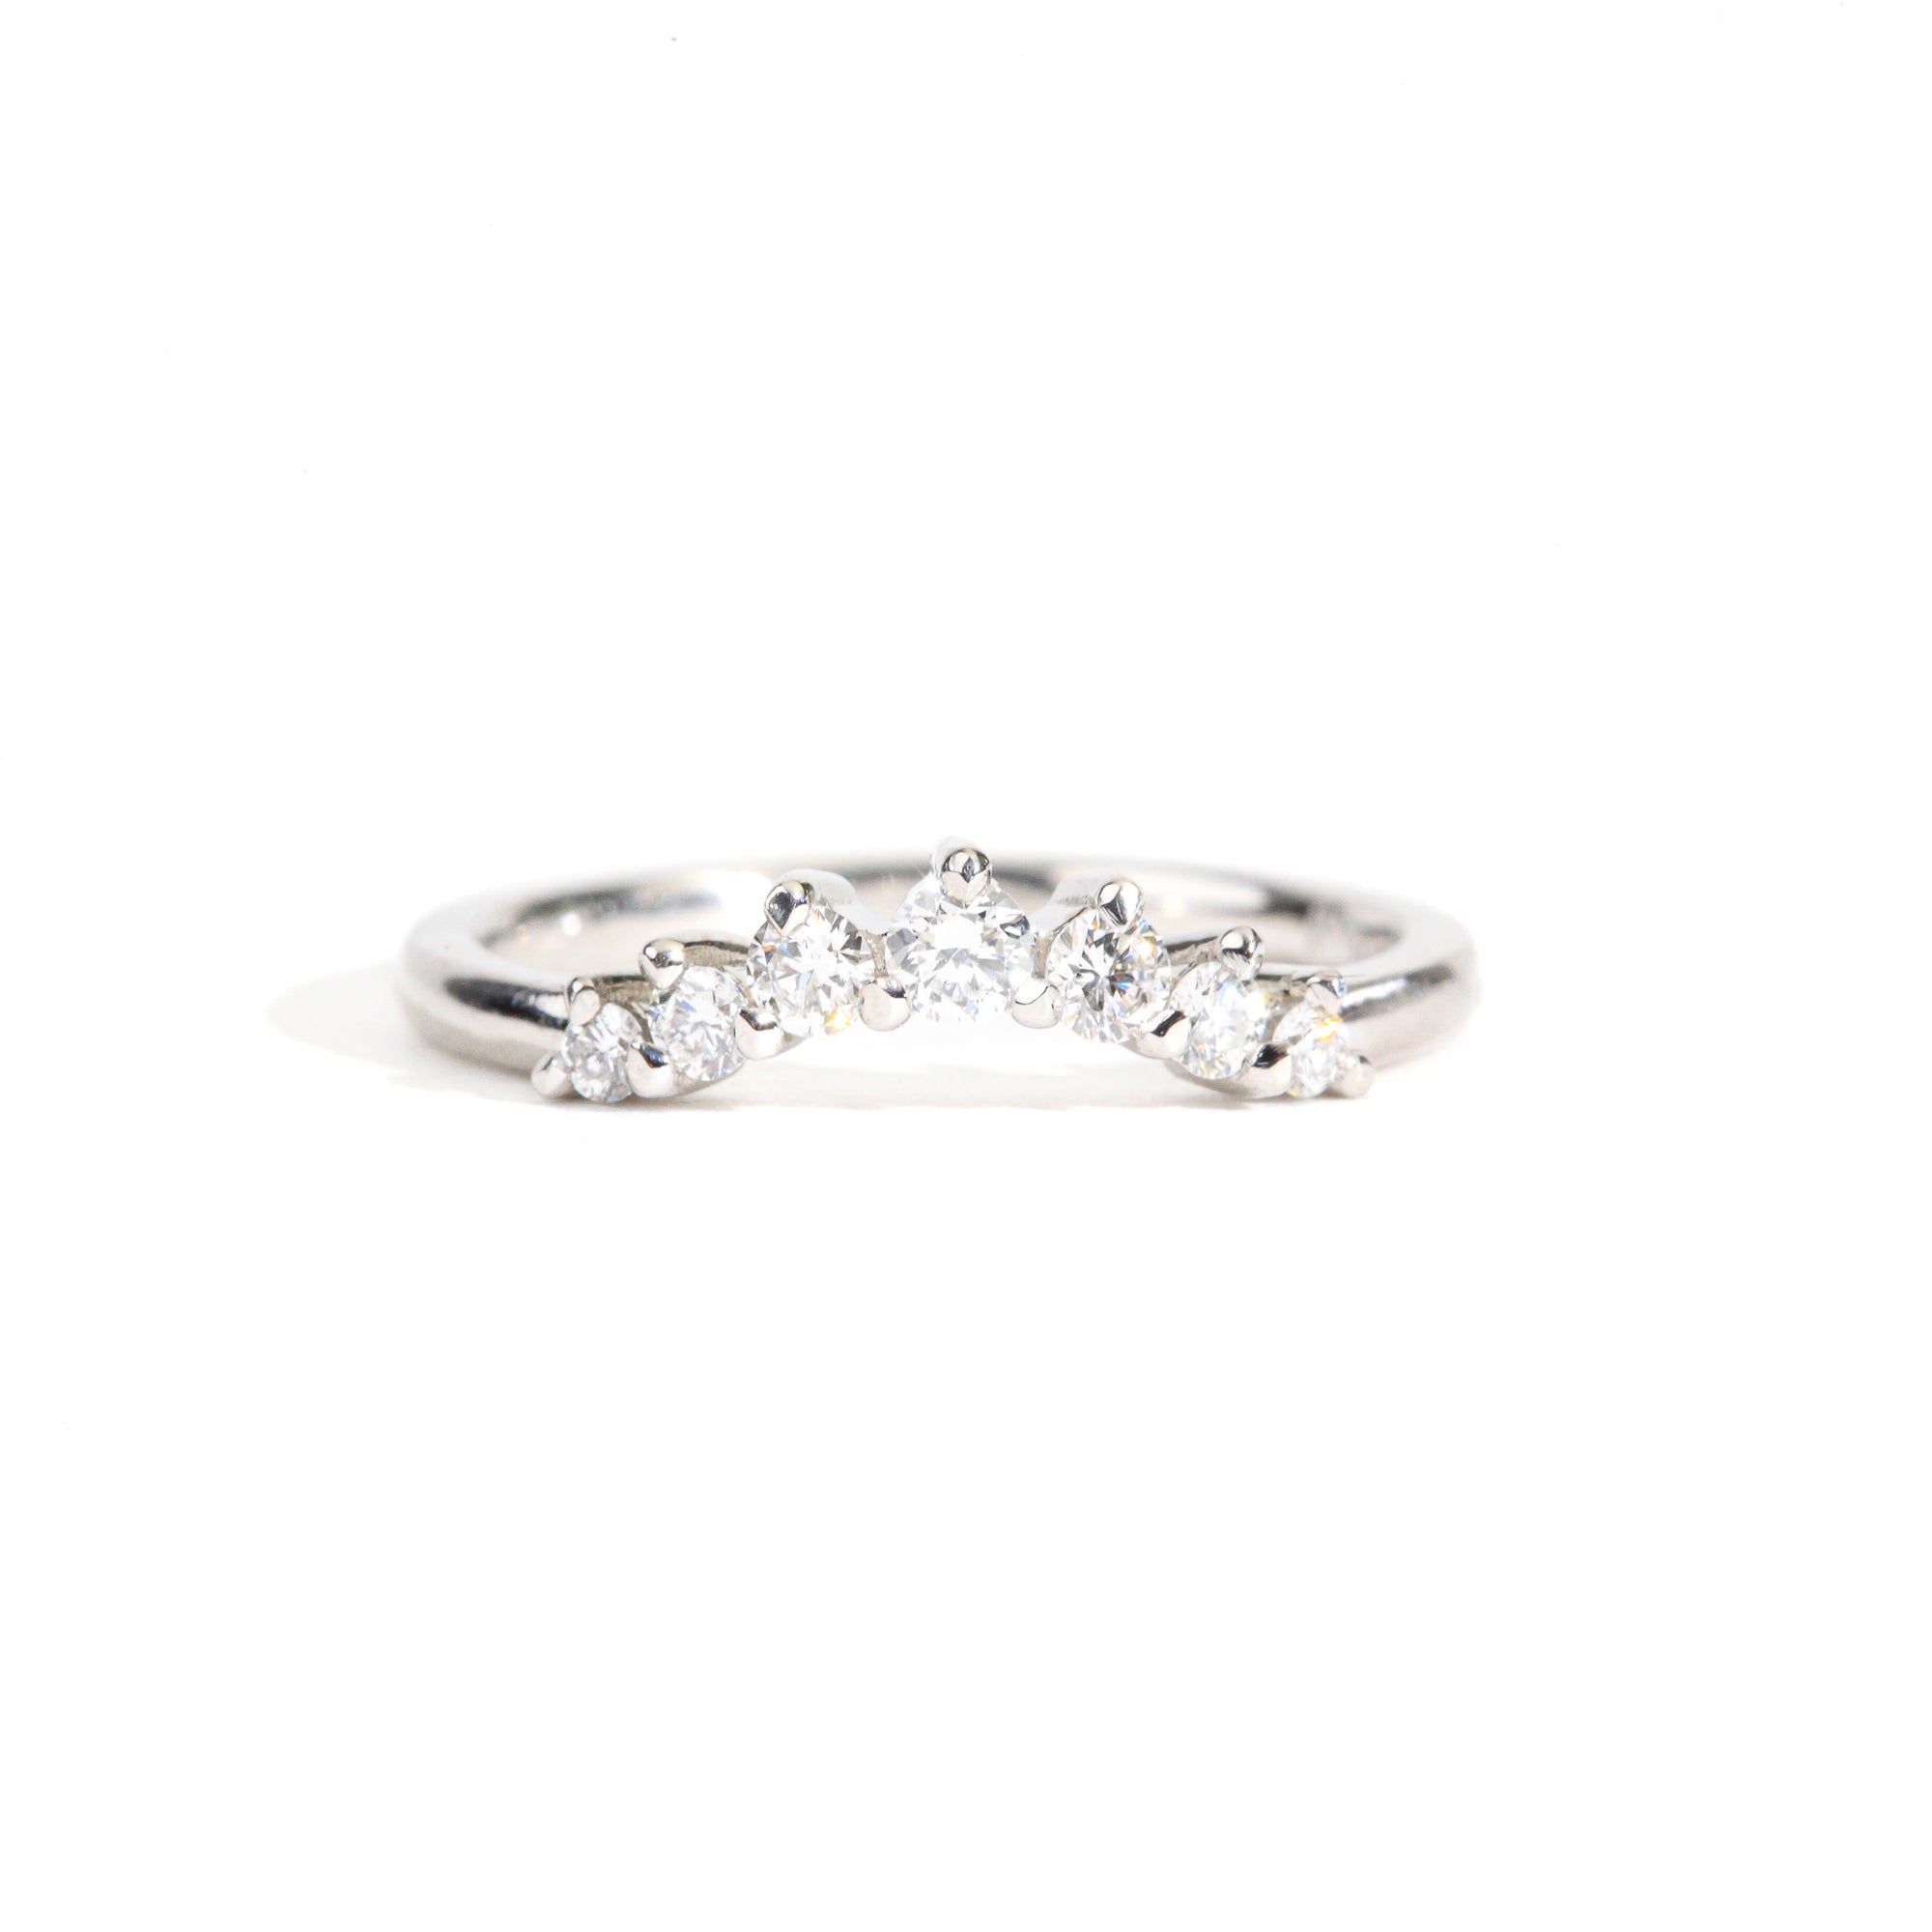 18 carat white gold woman's wedding band with 7 round white diamonds, claw set in a slight curve.